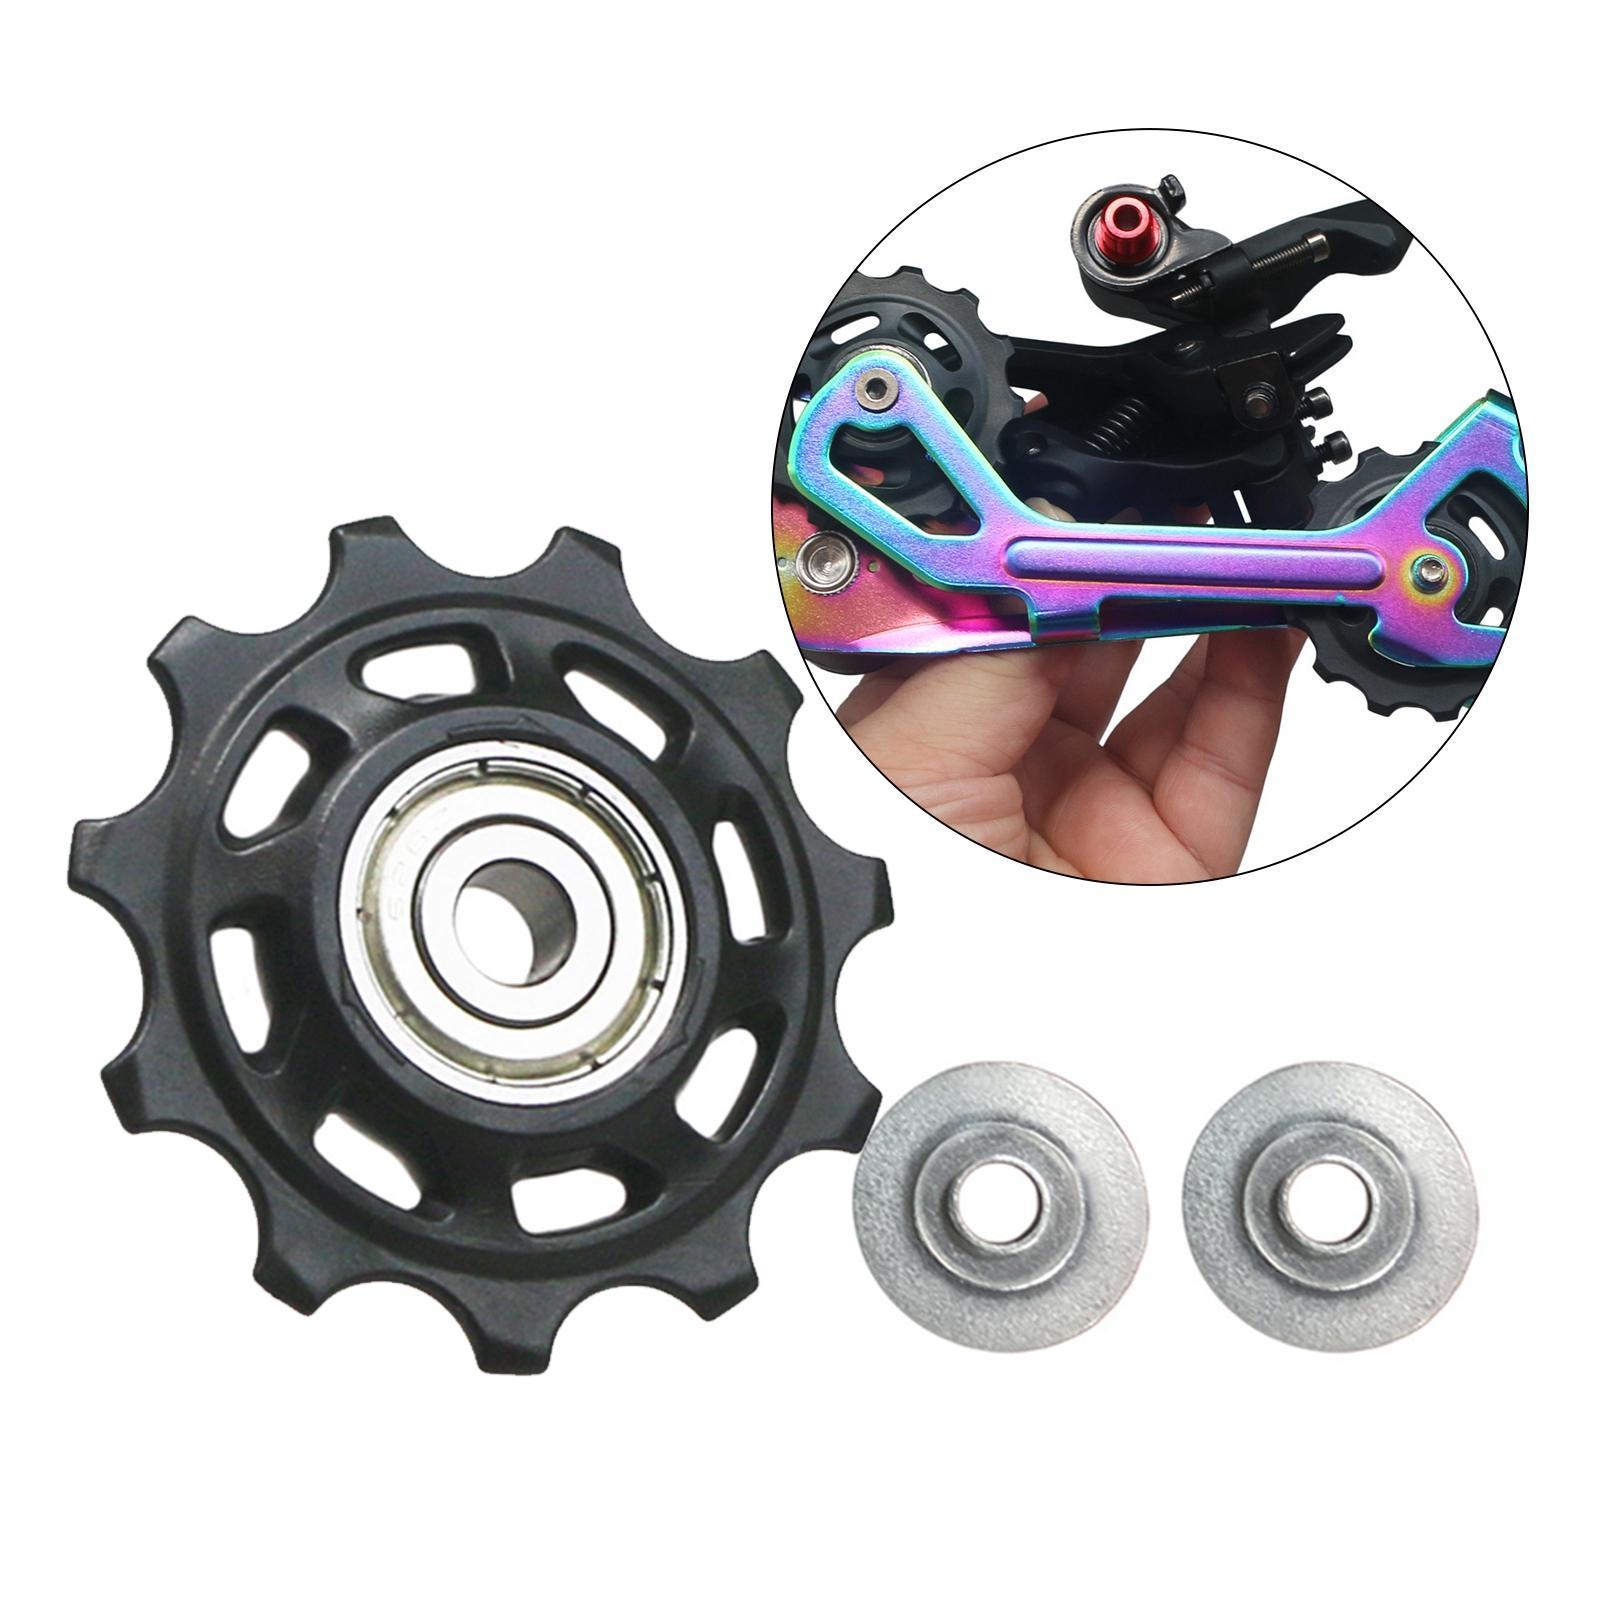 2x  Rear Derailleur Pulley Aluminum Alloy Replacement Parts Sealed Bearing Jockey   Roller